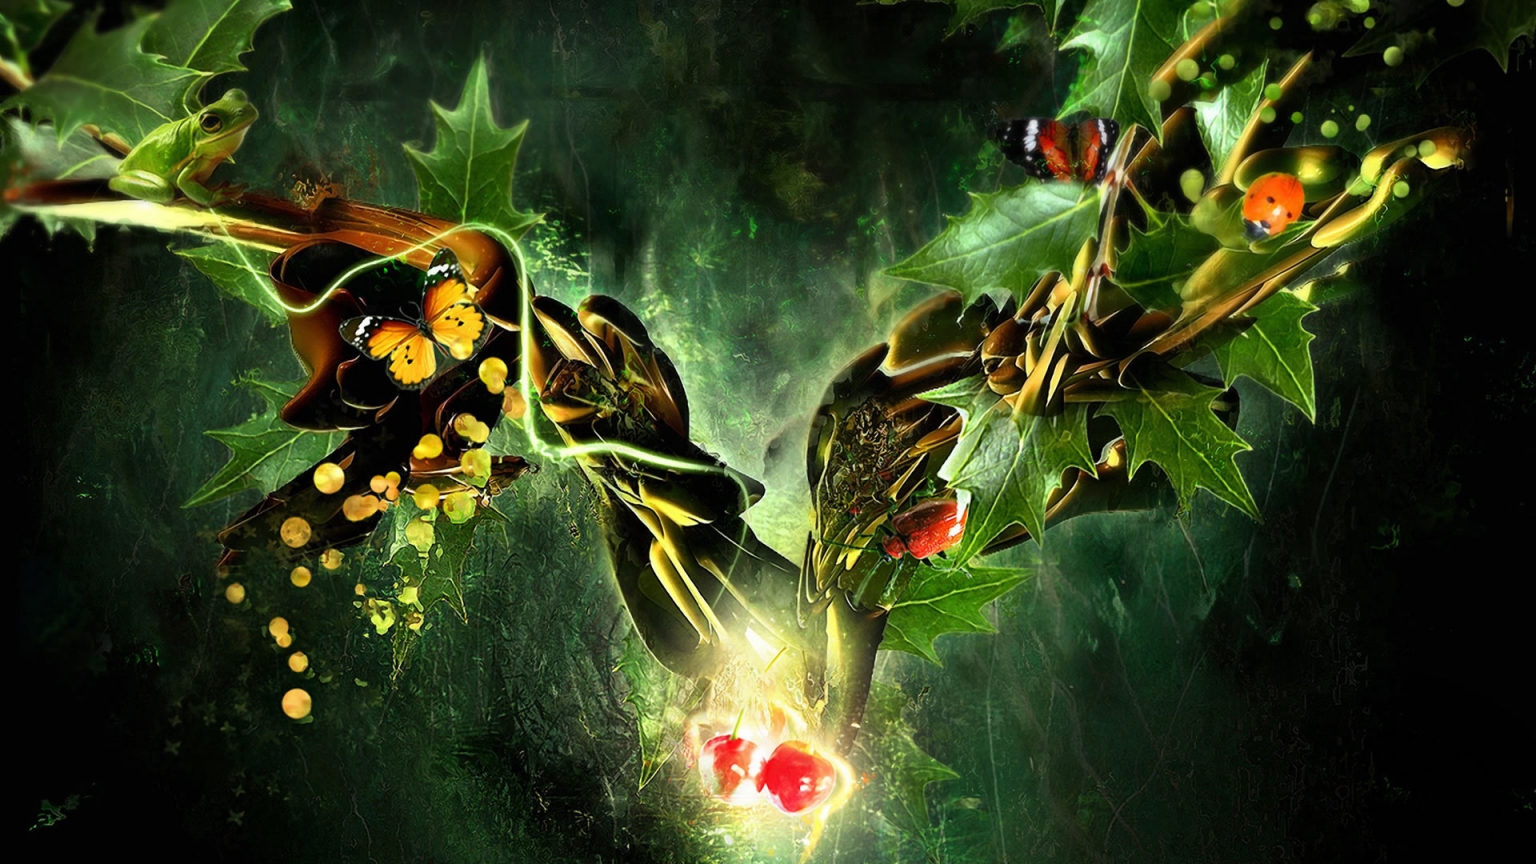 Butterfly, Ladybug, Frog in a Fantasy World for 1536 x 864 HDTV resolution